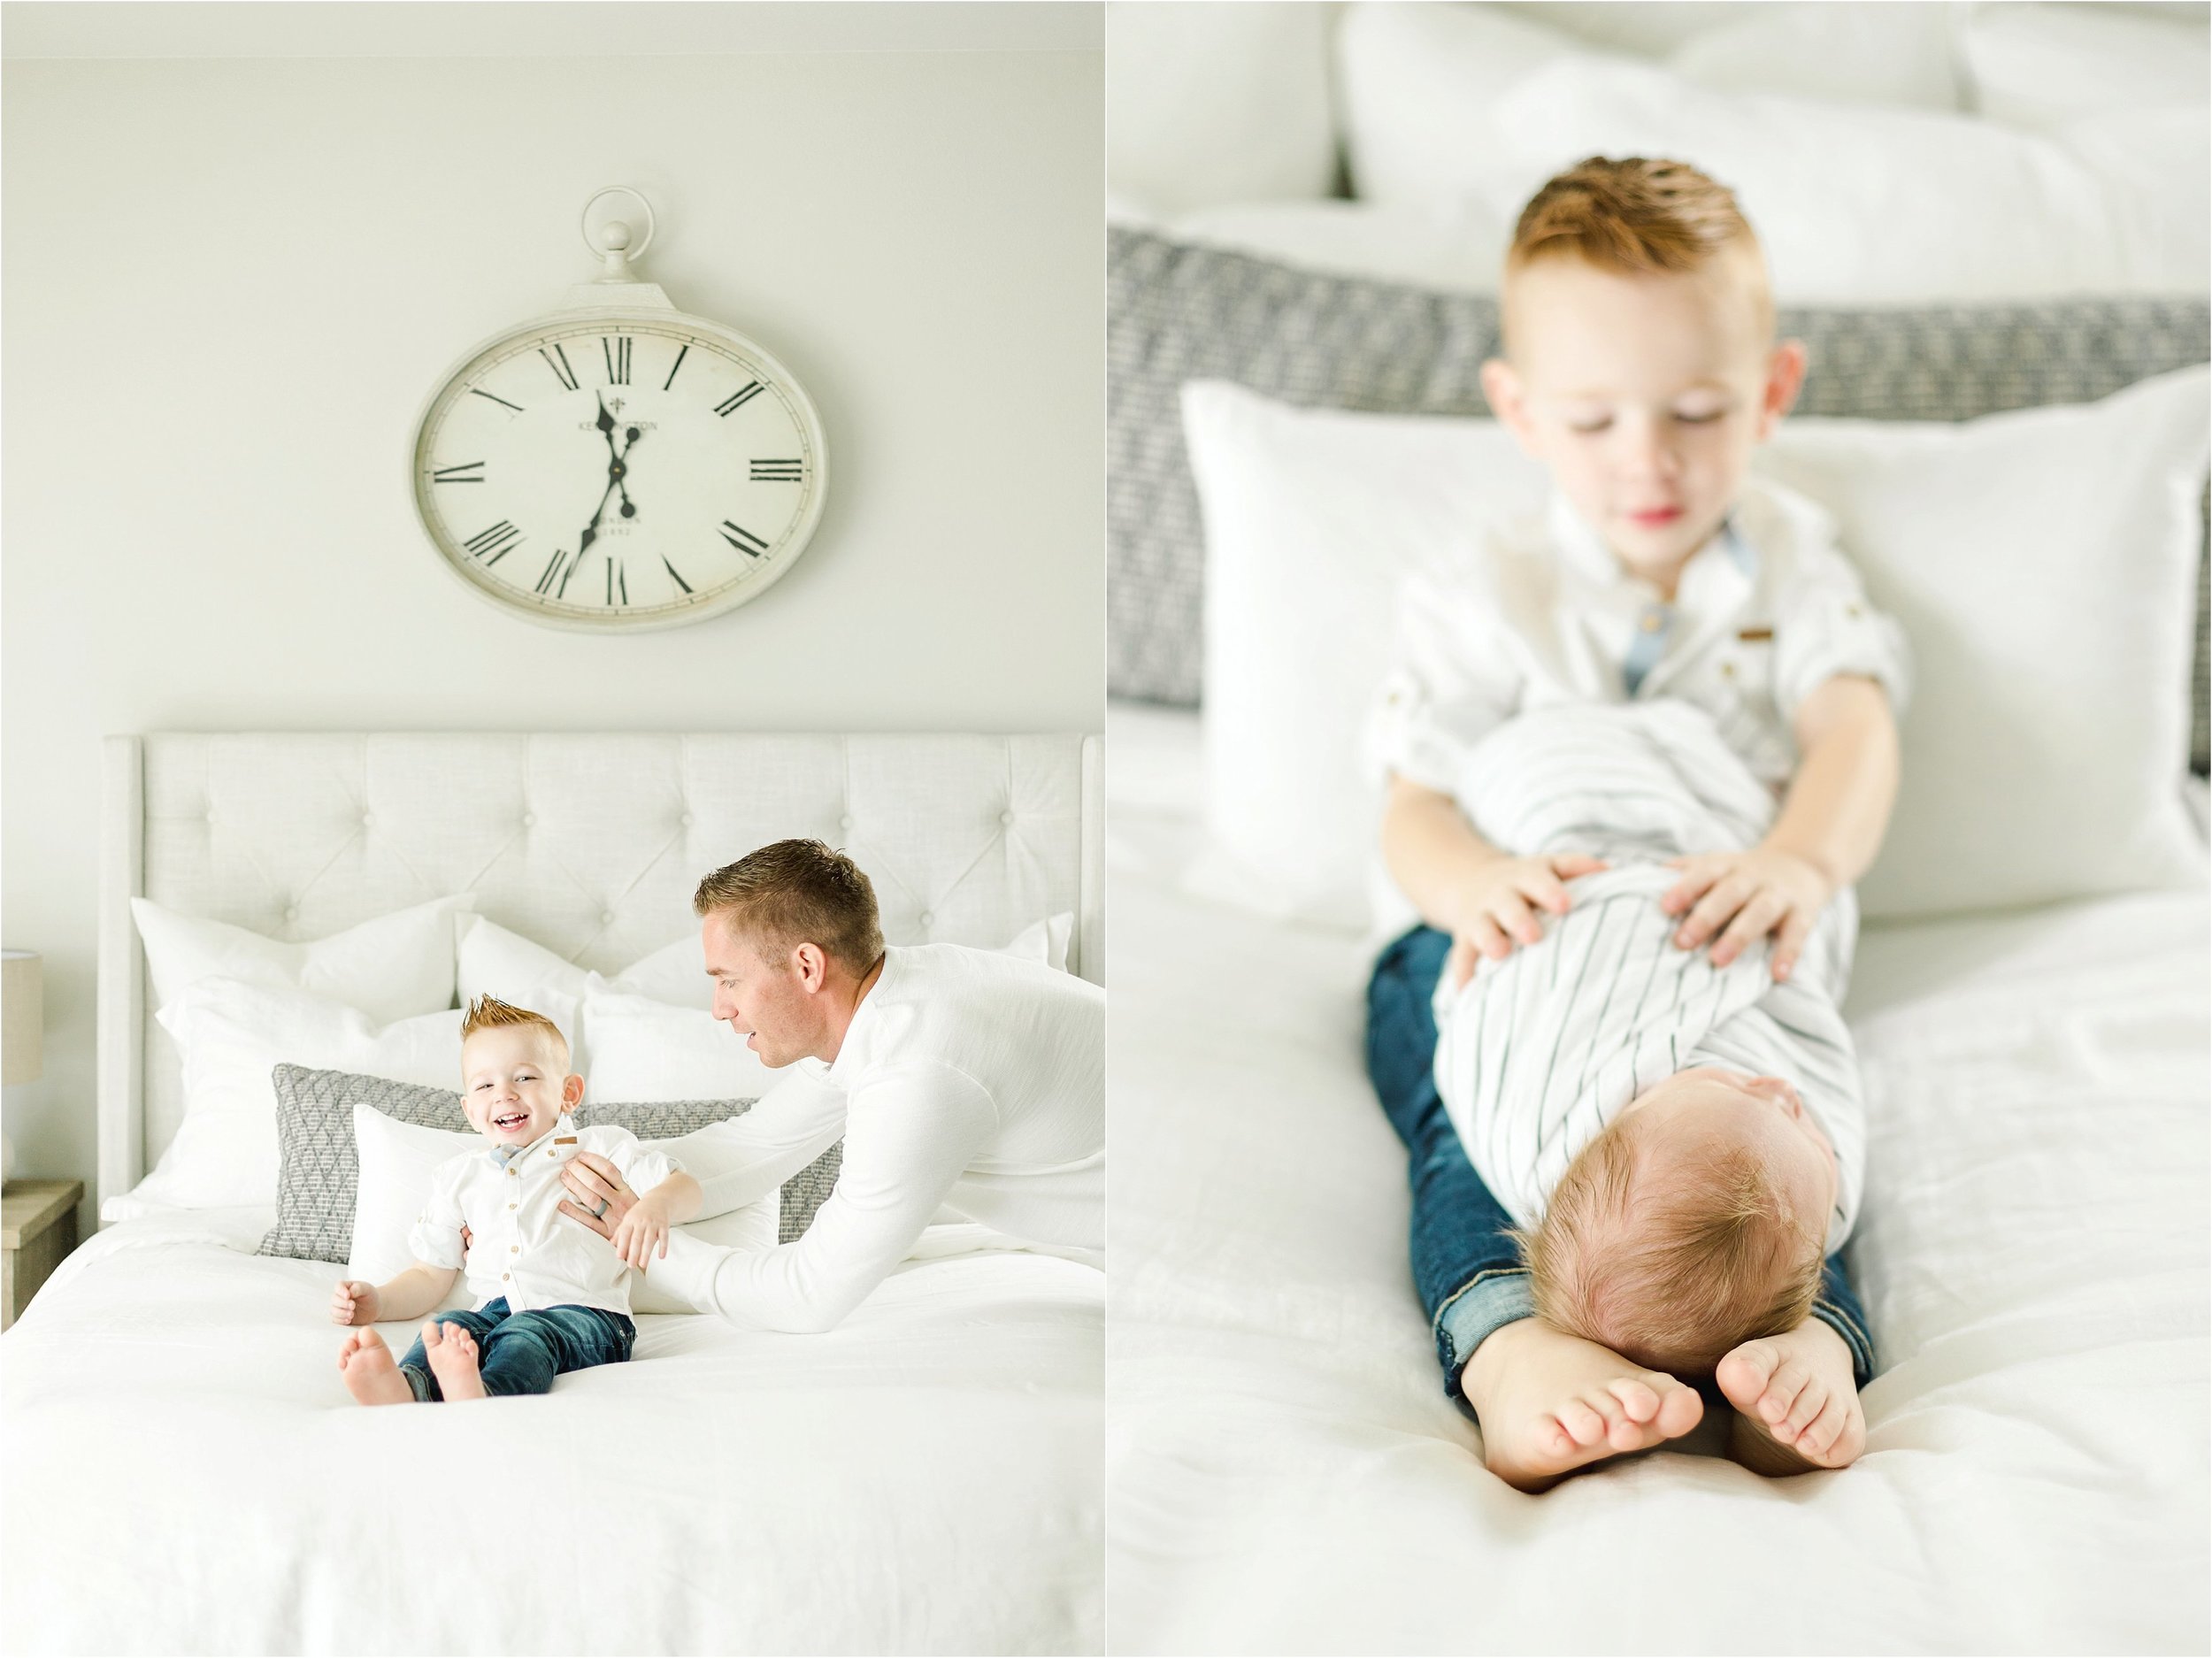 Image on the left shows the Father playing with his oldest son.  Image on the right shows older brother holding his baby brother.